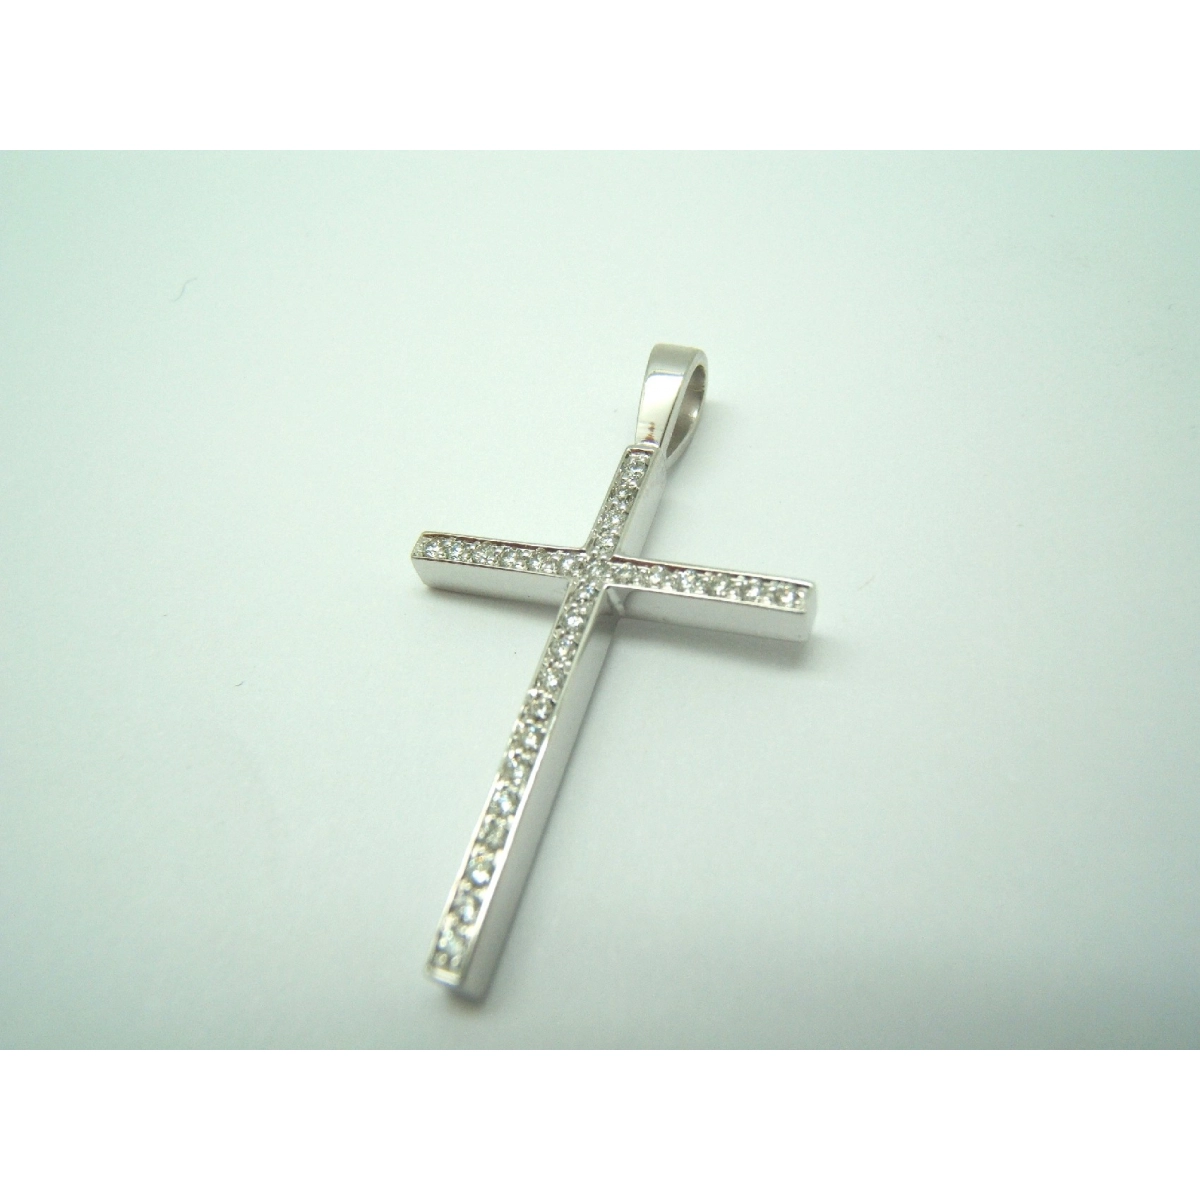 NECKLACE CROSS WHITE GOLD AND DIAMONDS B-79 C-187